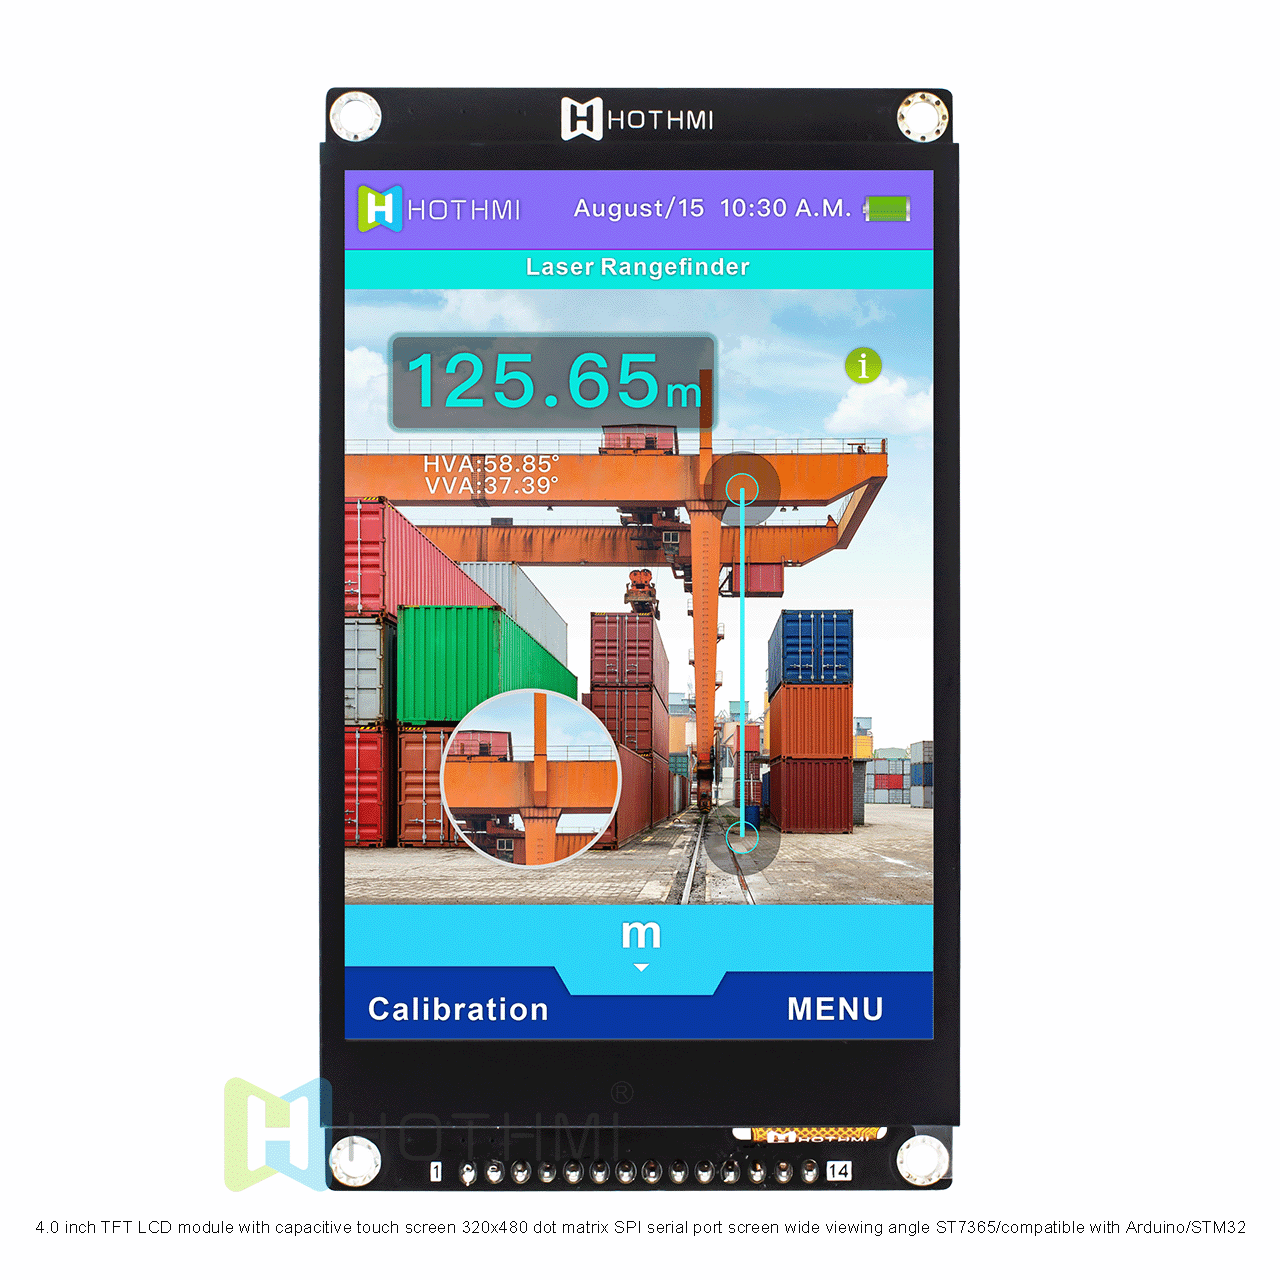 4.0 inch TFT LCD module with capacitive touch screen 320x480 dot matrix SPI serial port screen wide viewing angle ST7365/compatible with Arduino/STM32